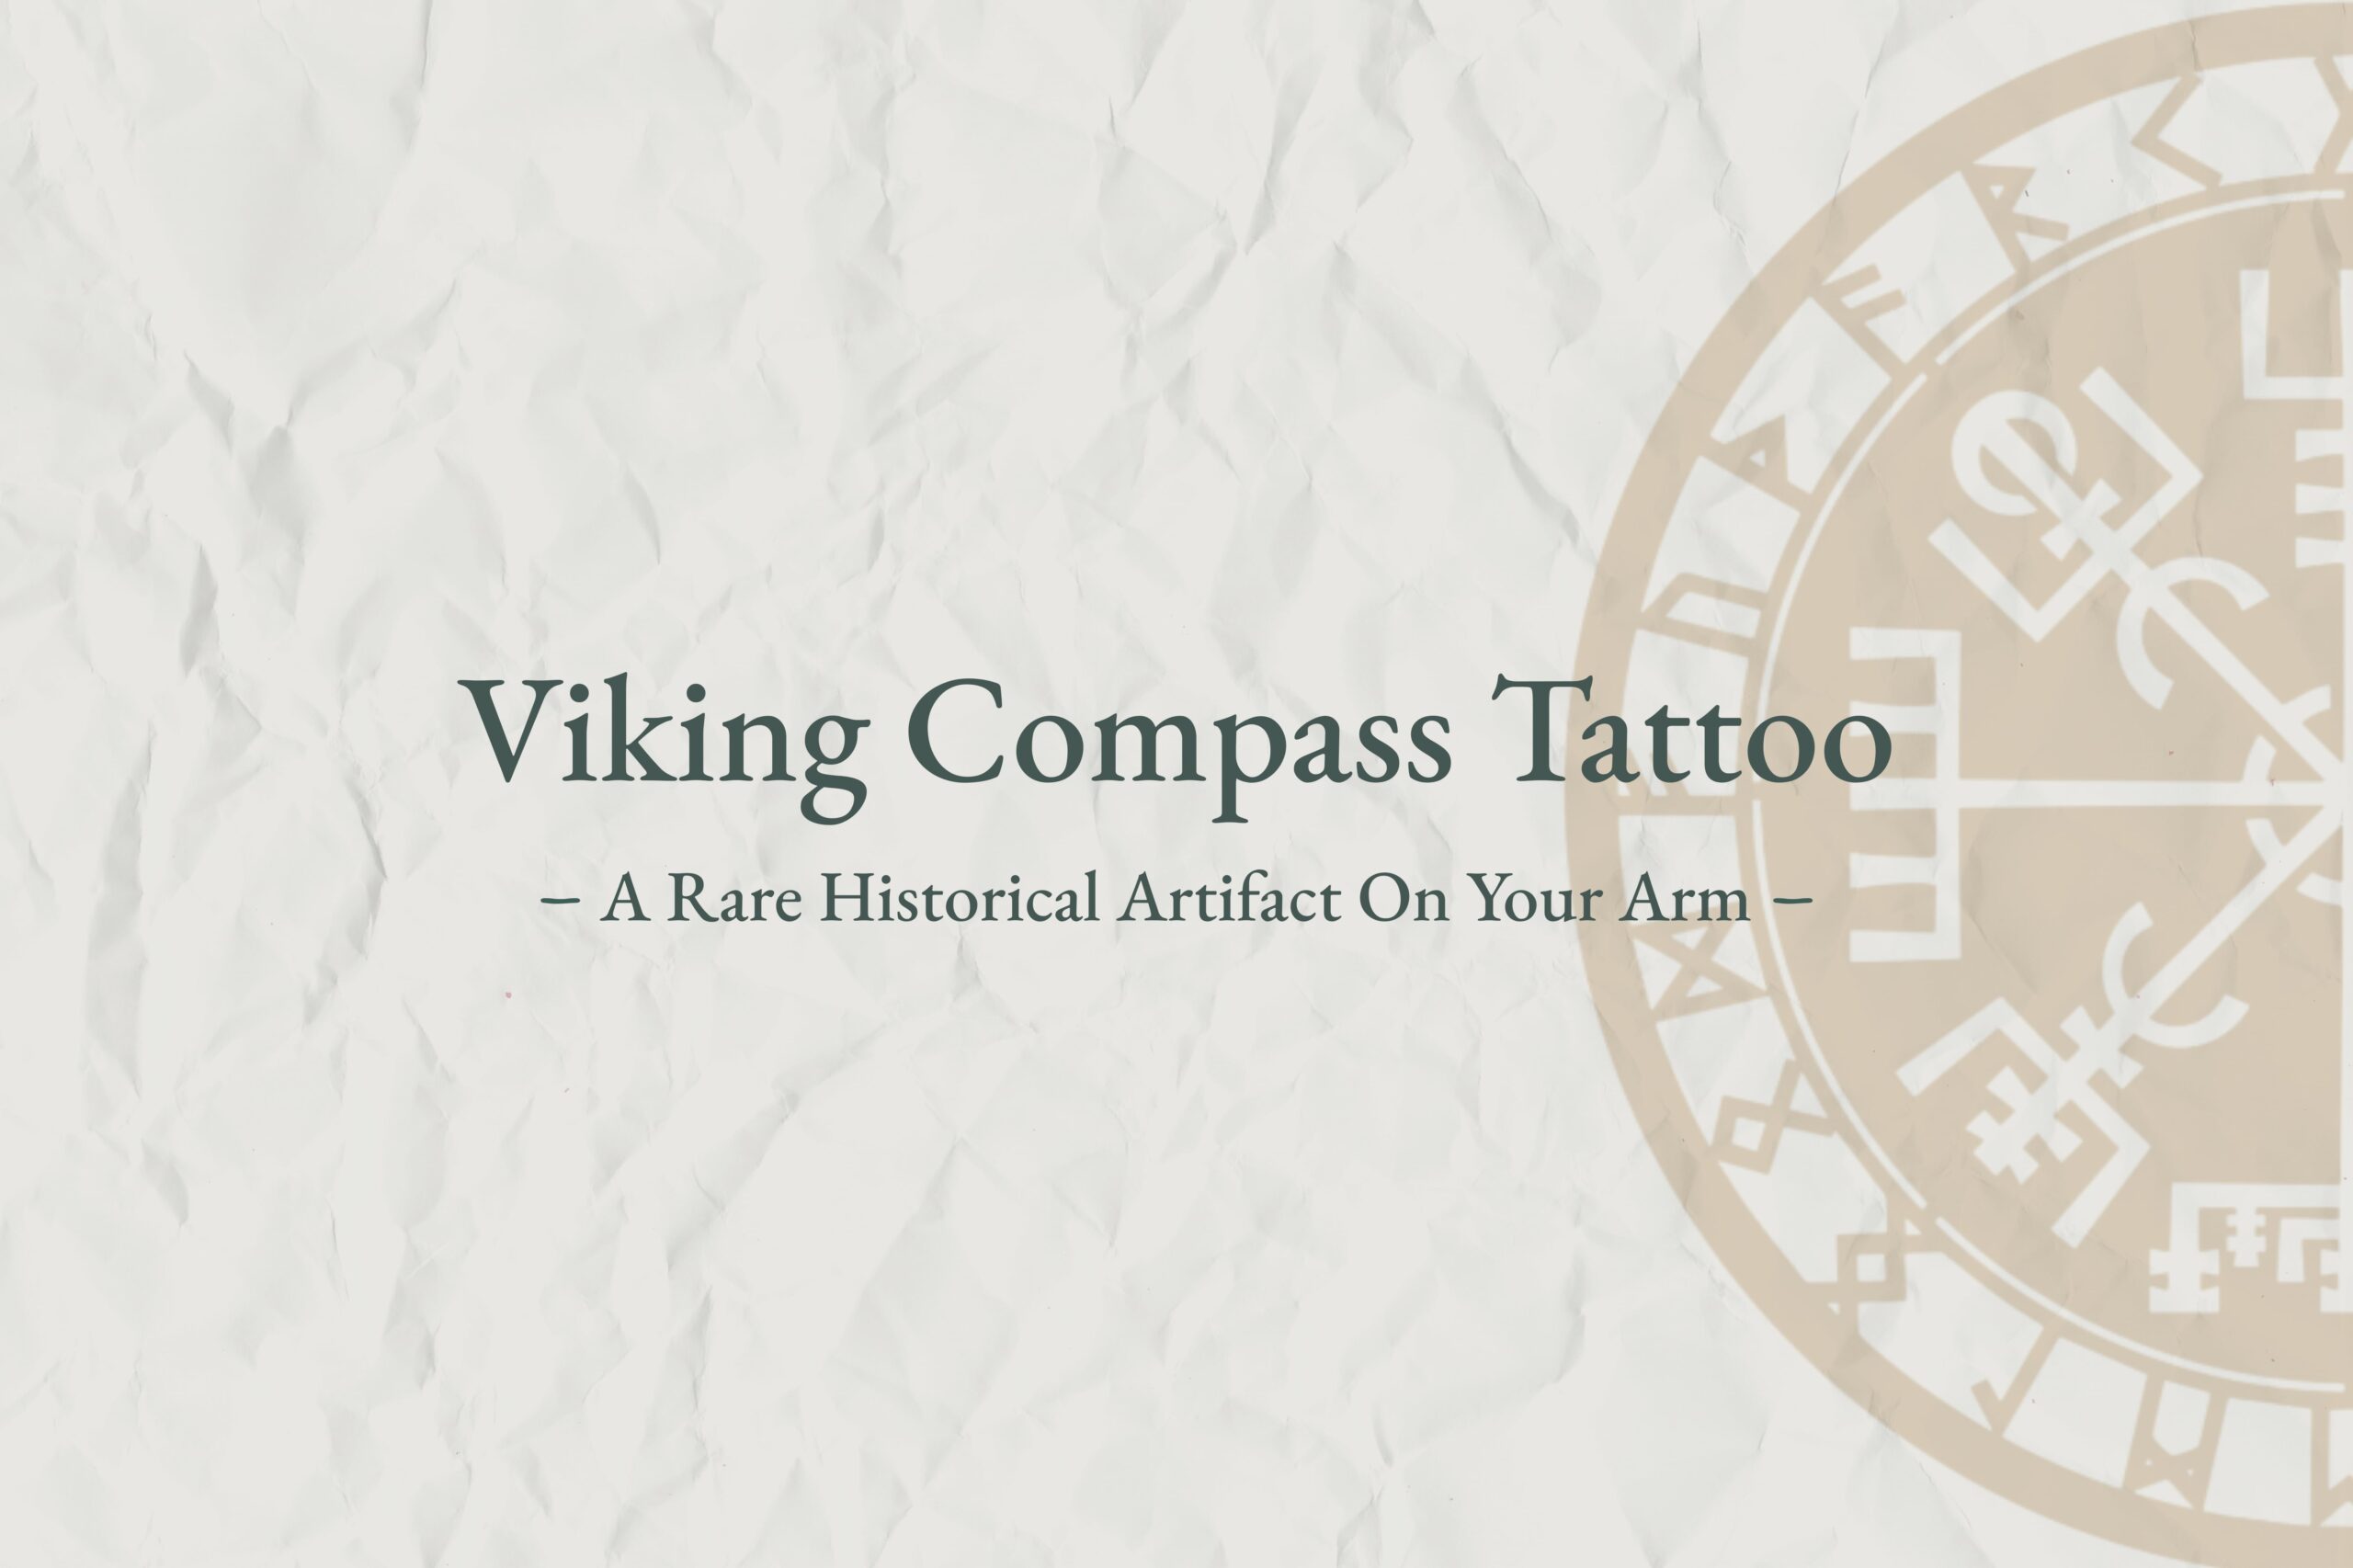 Viking compass tattoo on Brittany's left inner arm.